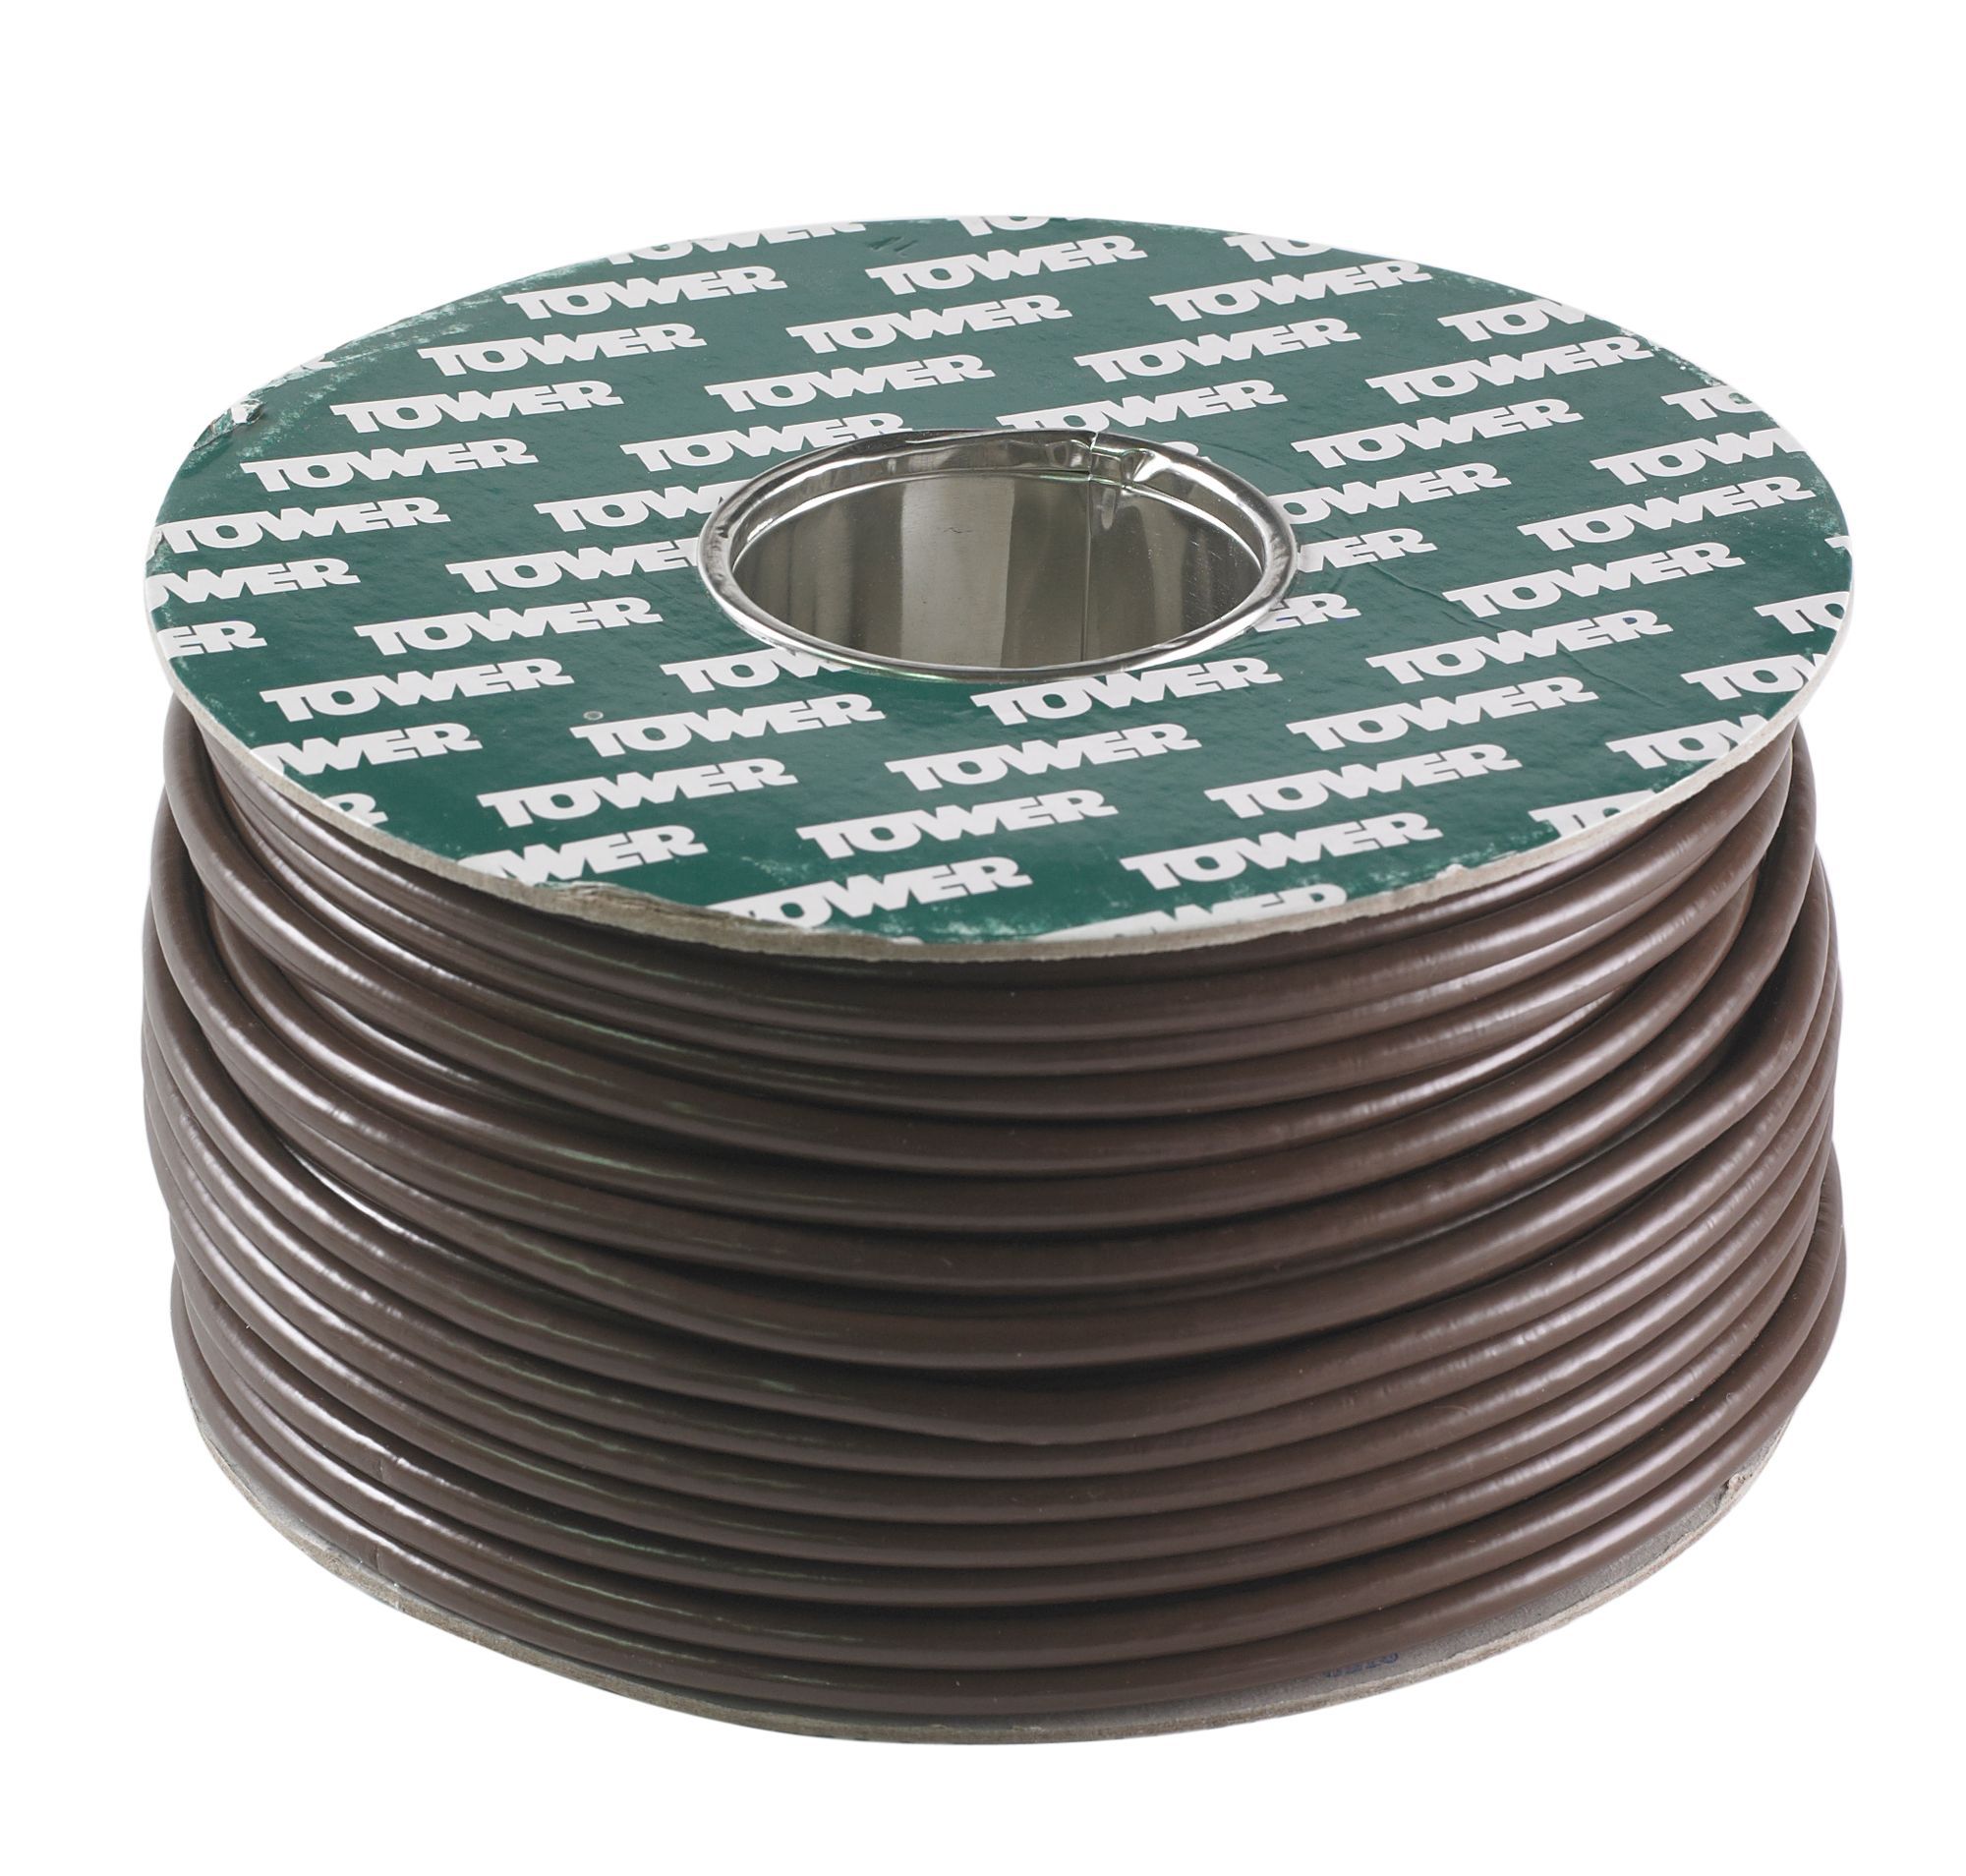 Tower RG6 Black Coaxial cable, 100m